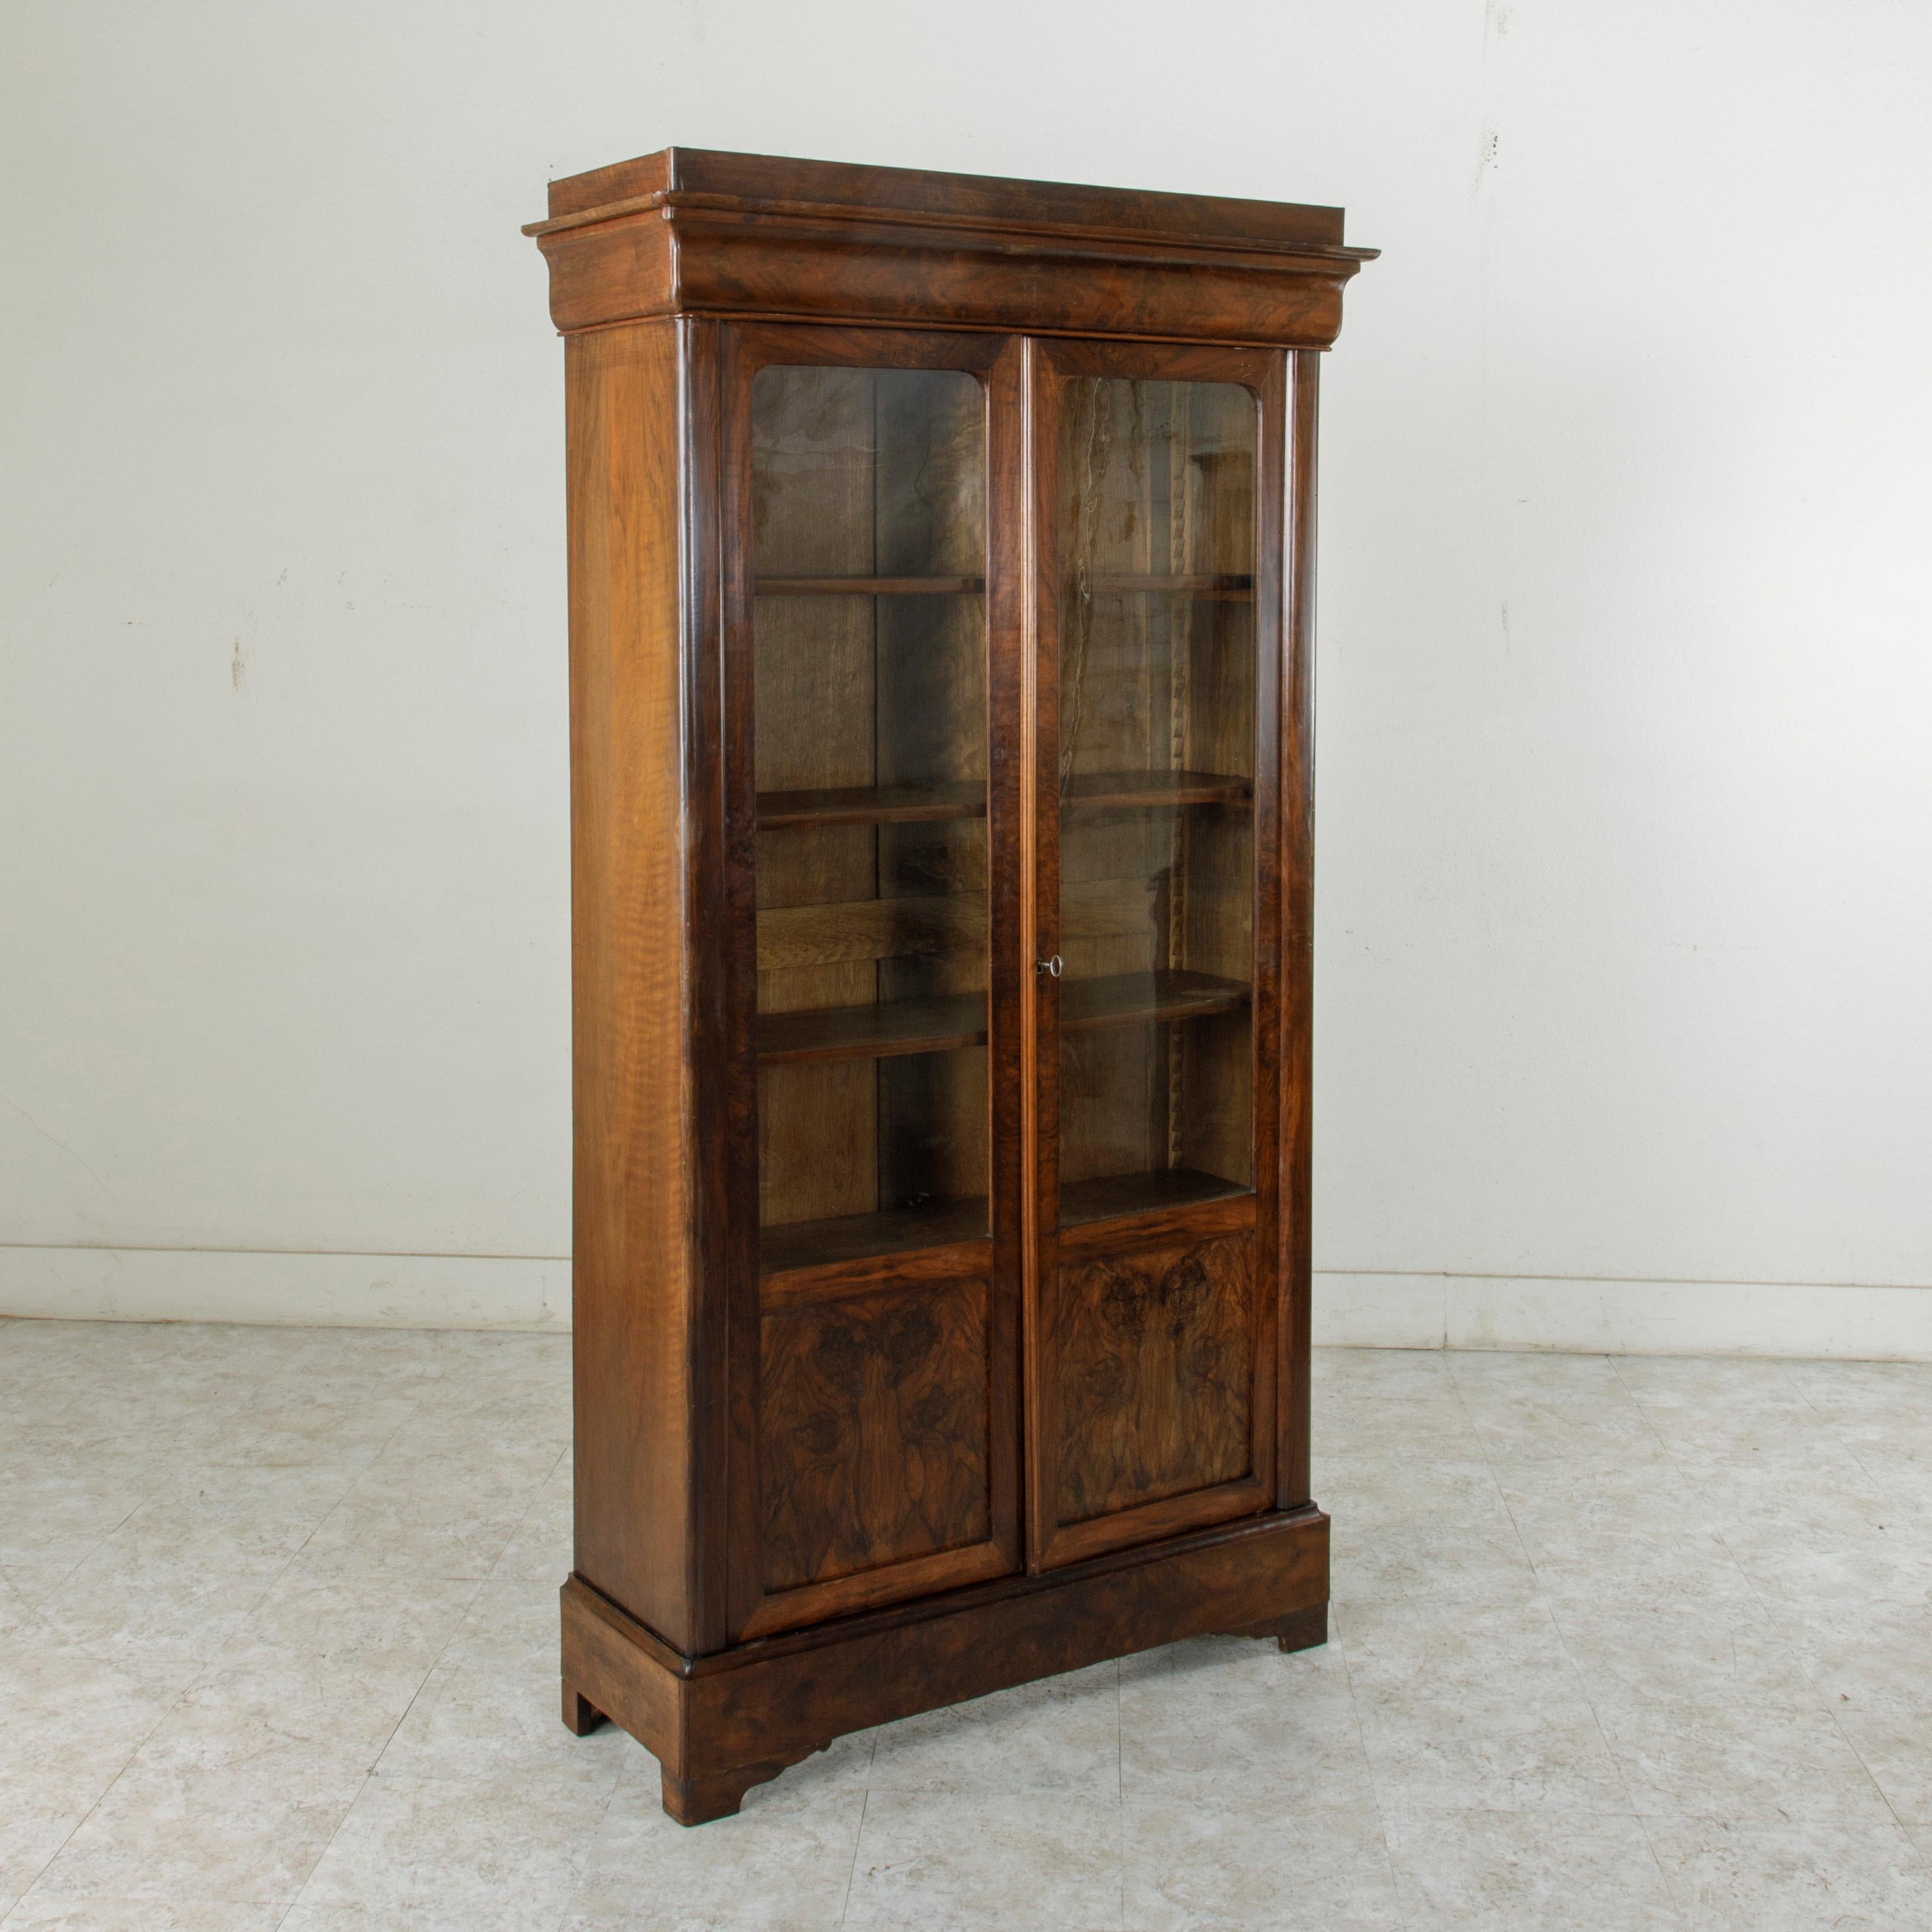 This 19th century Louis Philippe period flamed mahogany bibliothèque, bookcase, or vitrine features a book matched burl facade with simple, handsome lines and two doors inset with their original hand blown glass. It has five adjustable interior